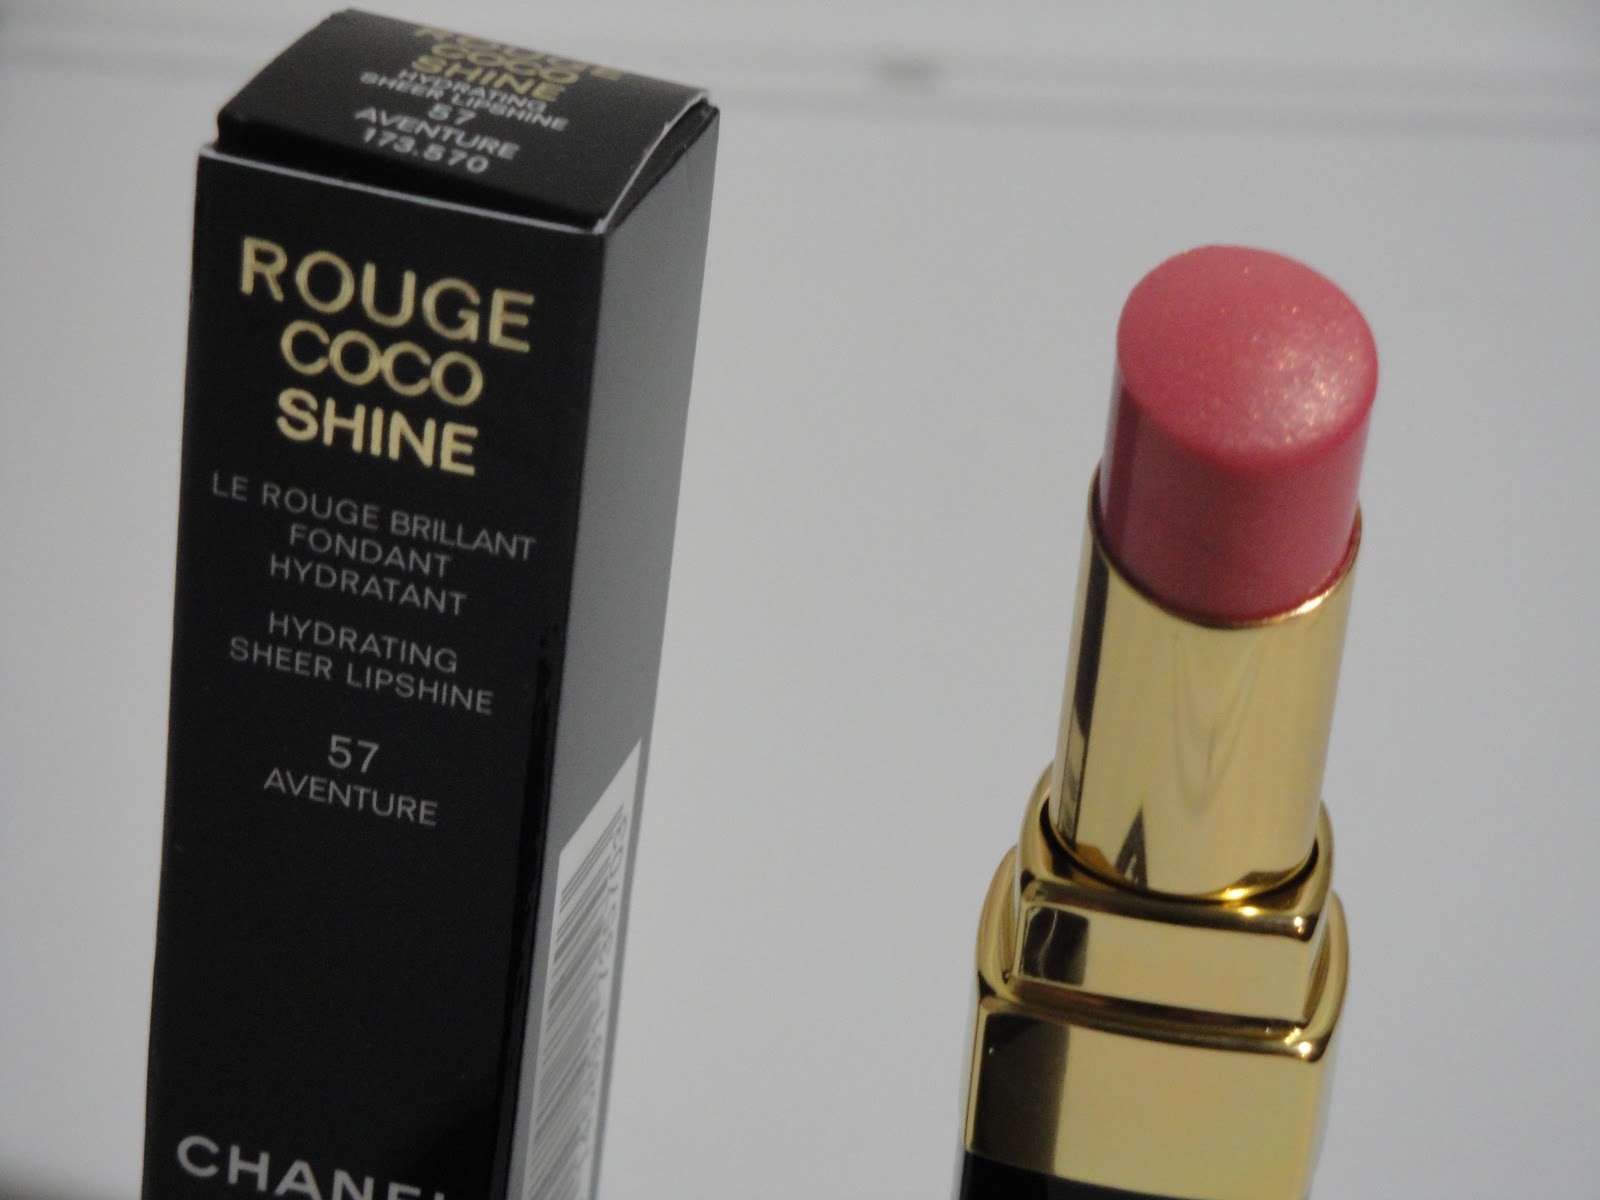 Jayded Dreaming Beauty Blog : 57 AVENTURE CHANEL ROUGE COCO SHINE